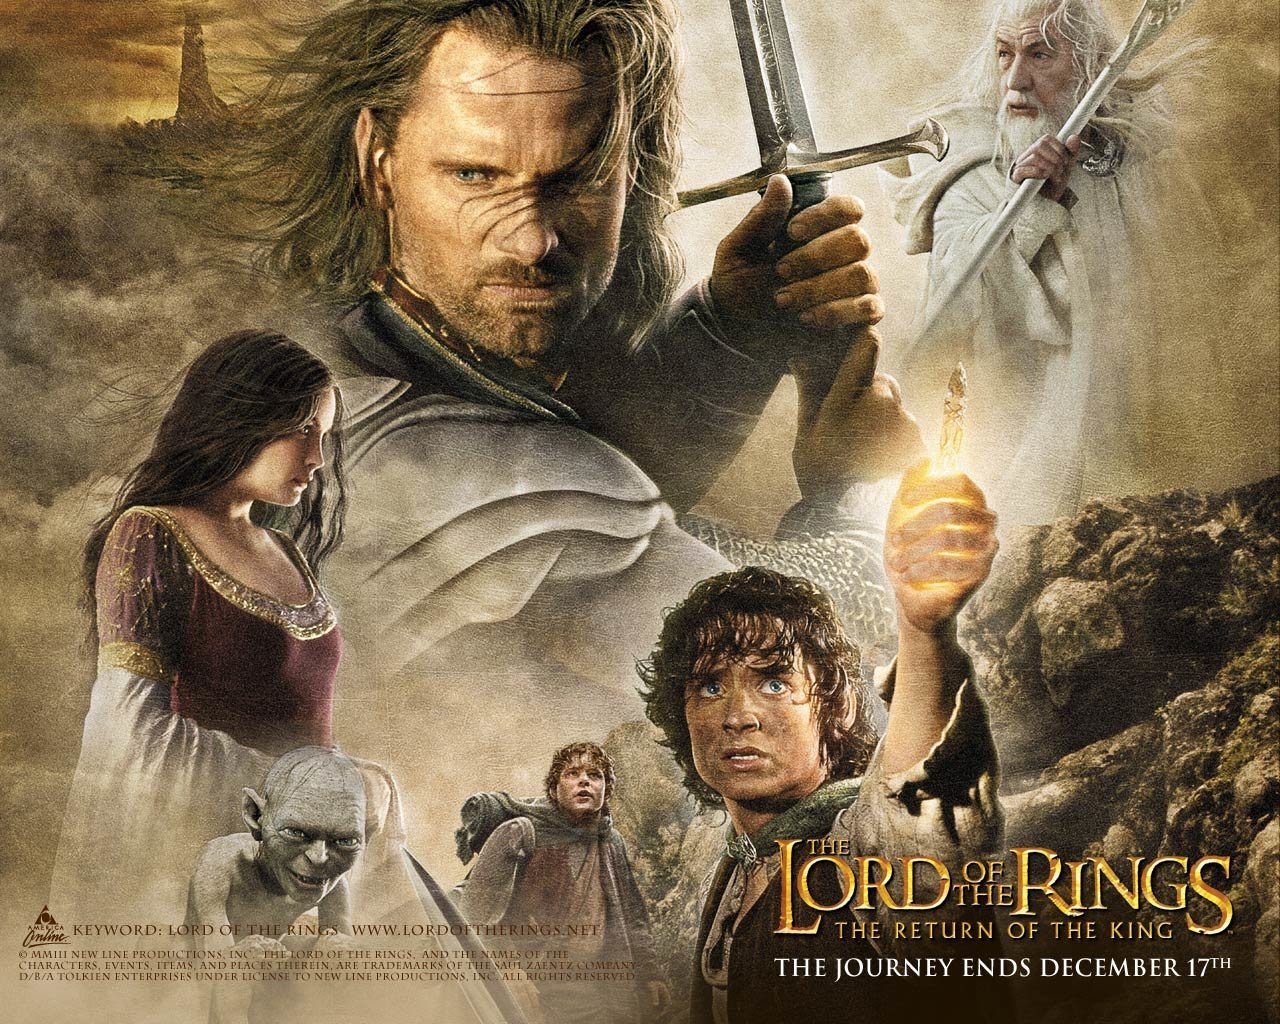 THE LORD OF THE RINGS: THE RETURN OF THE KING 